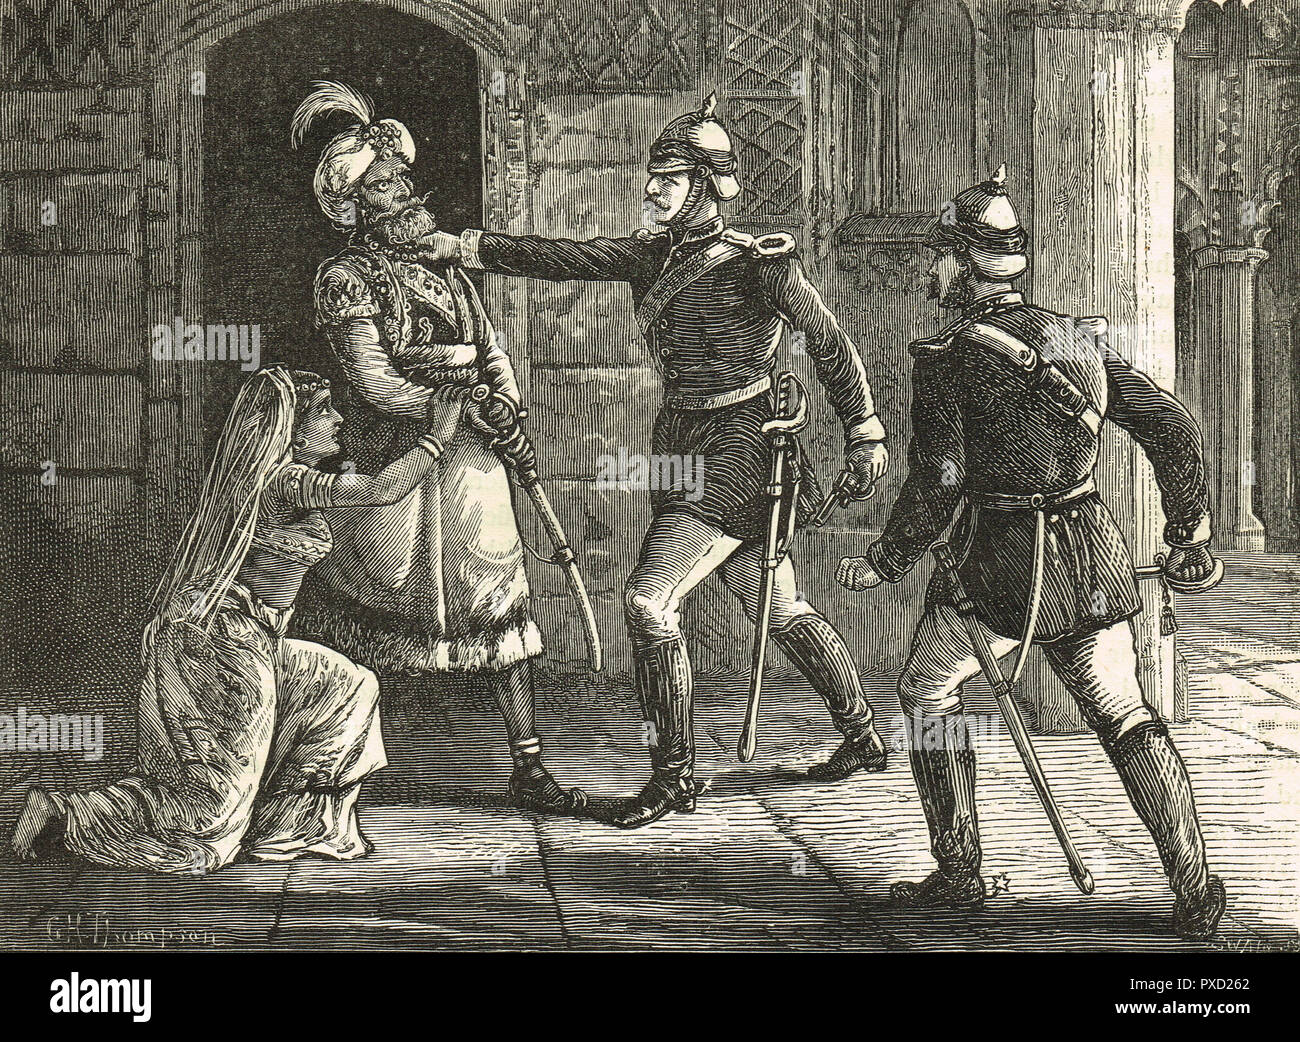 The arrest of Bahadur Shah Zafar, the King of Delhi, India, by Major William Hodson, 20 September 1857, during the Indian Rebellion of 1857 Stock Photo